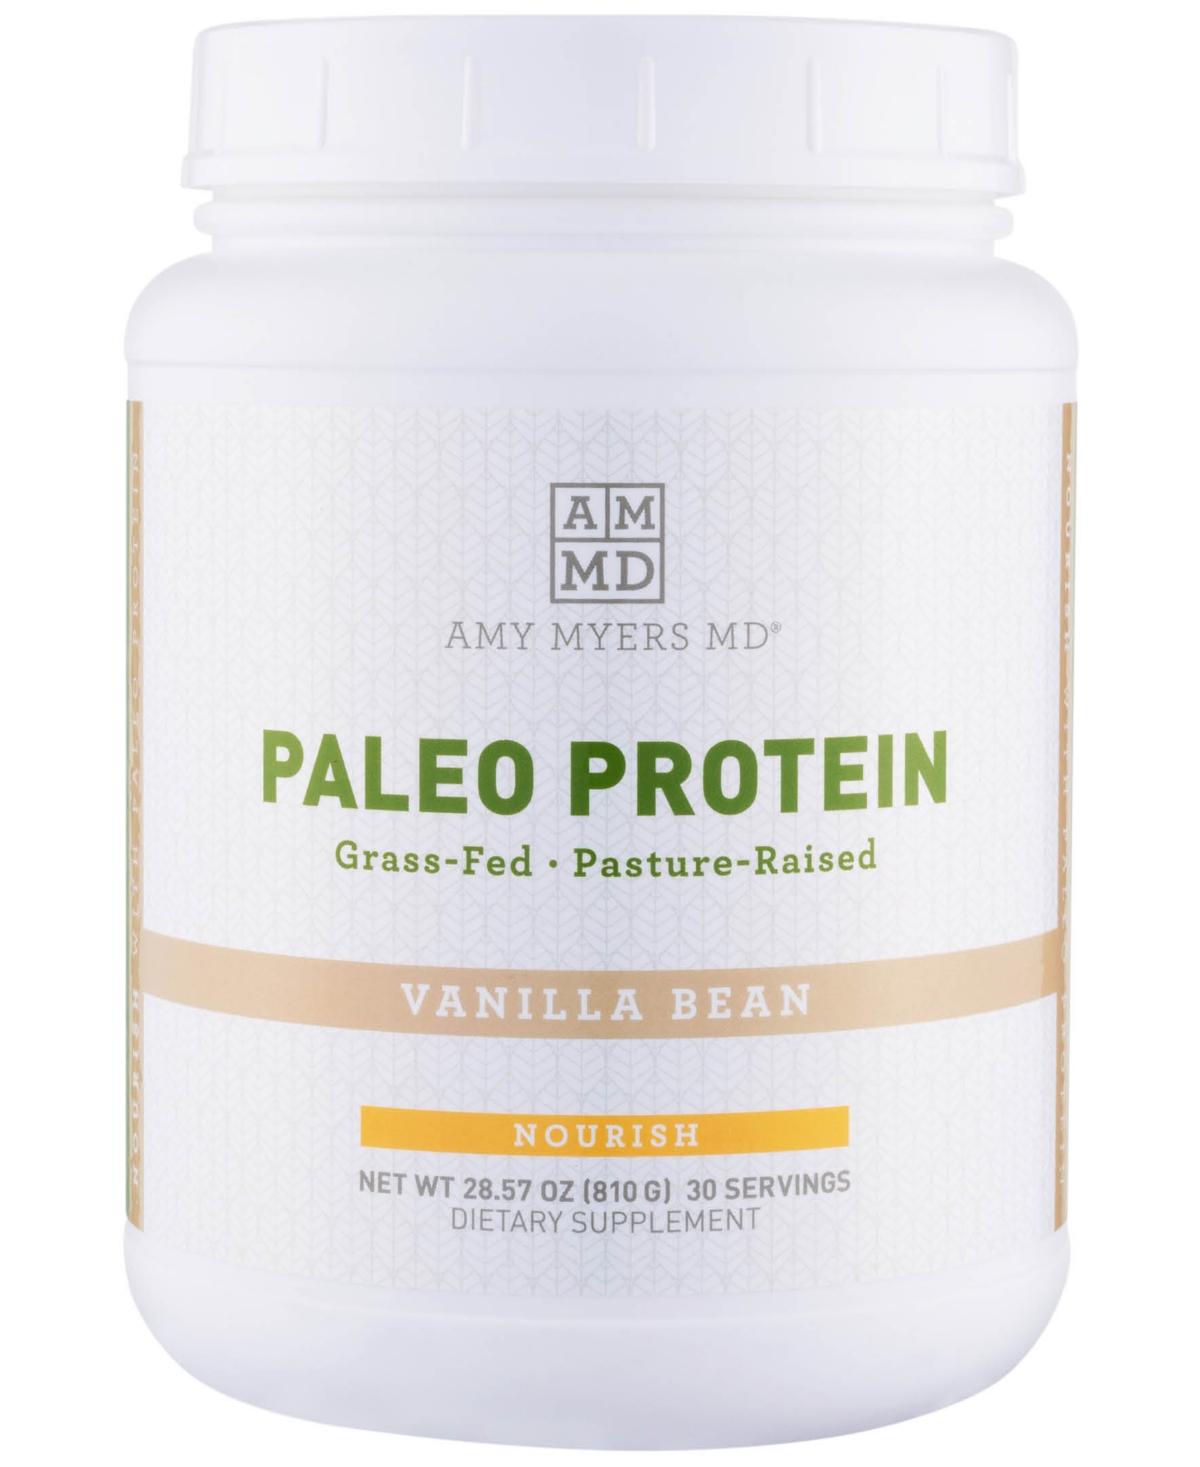 Amy Myers Md Paleo Protein - Vanilla Bean In No Color